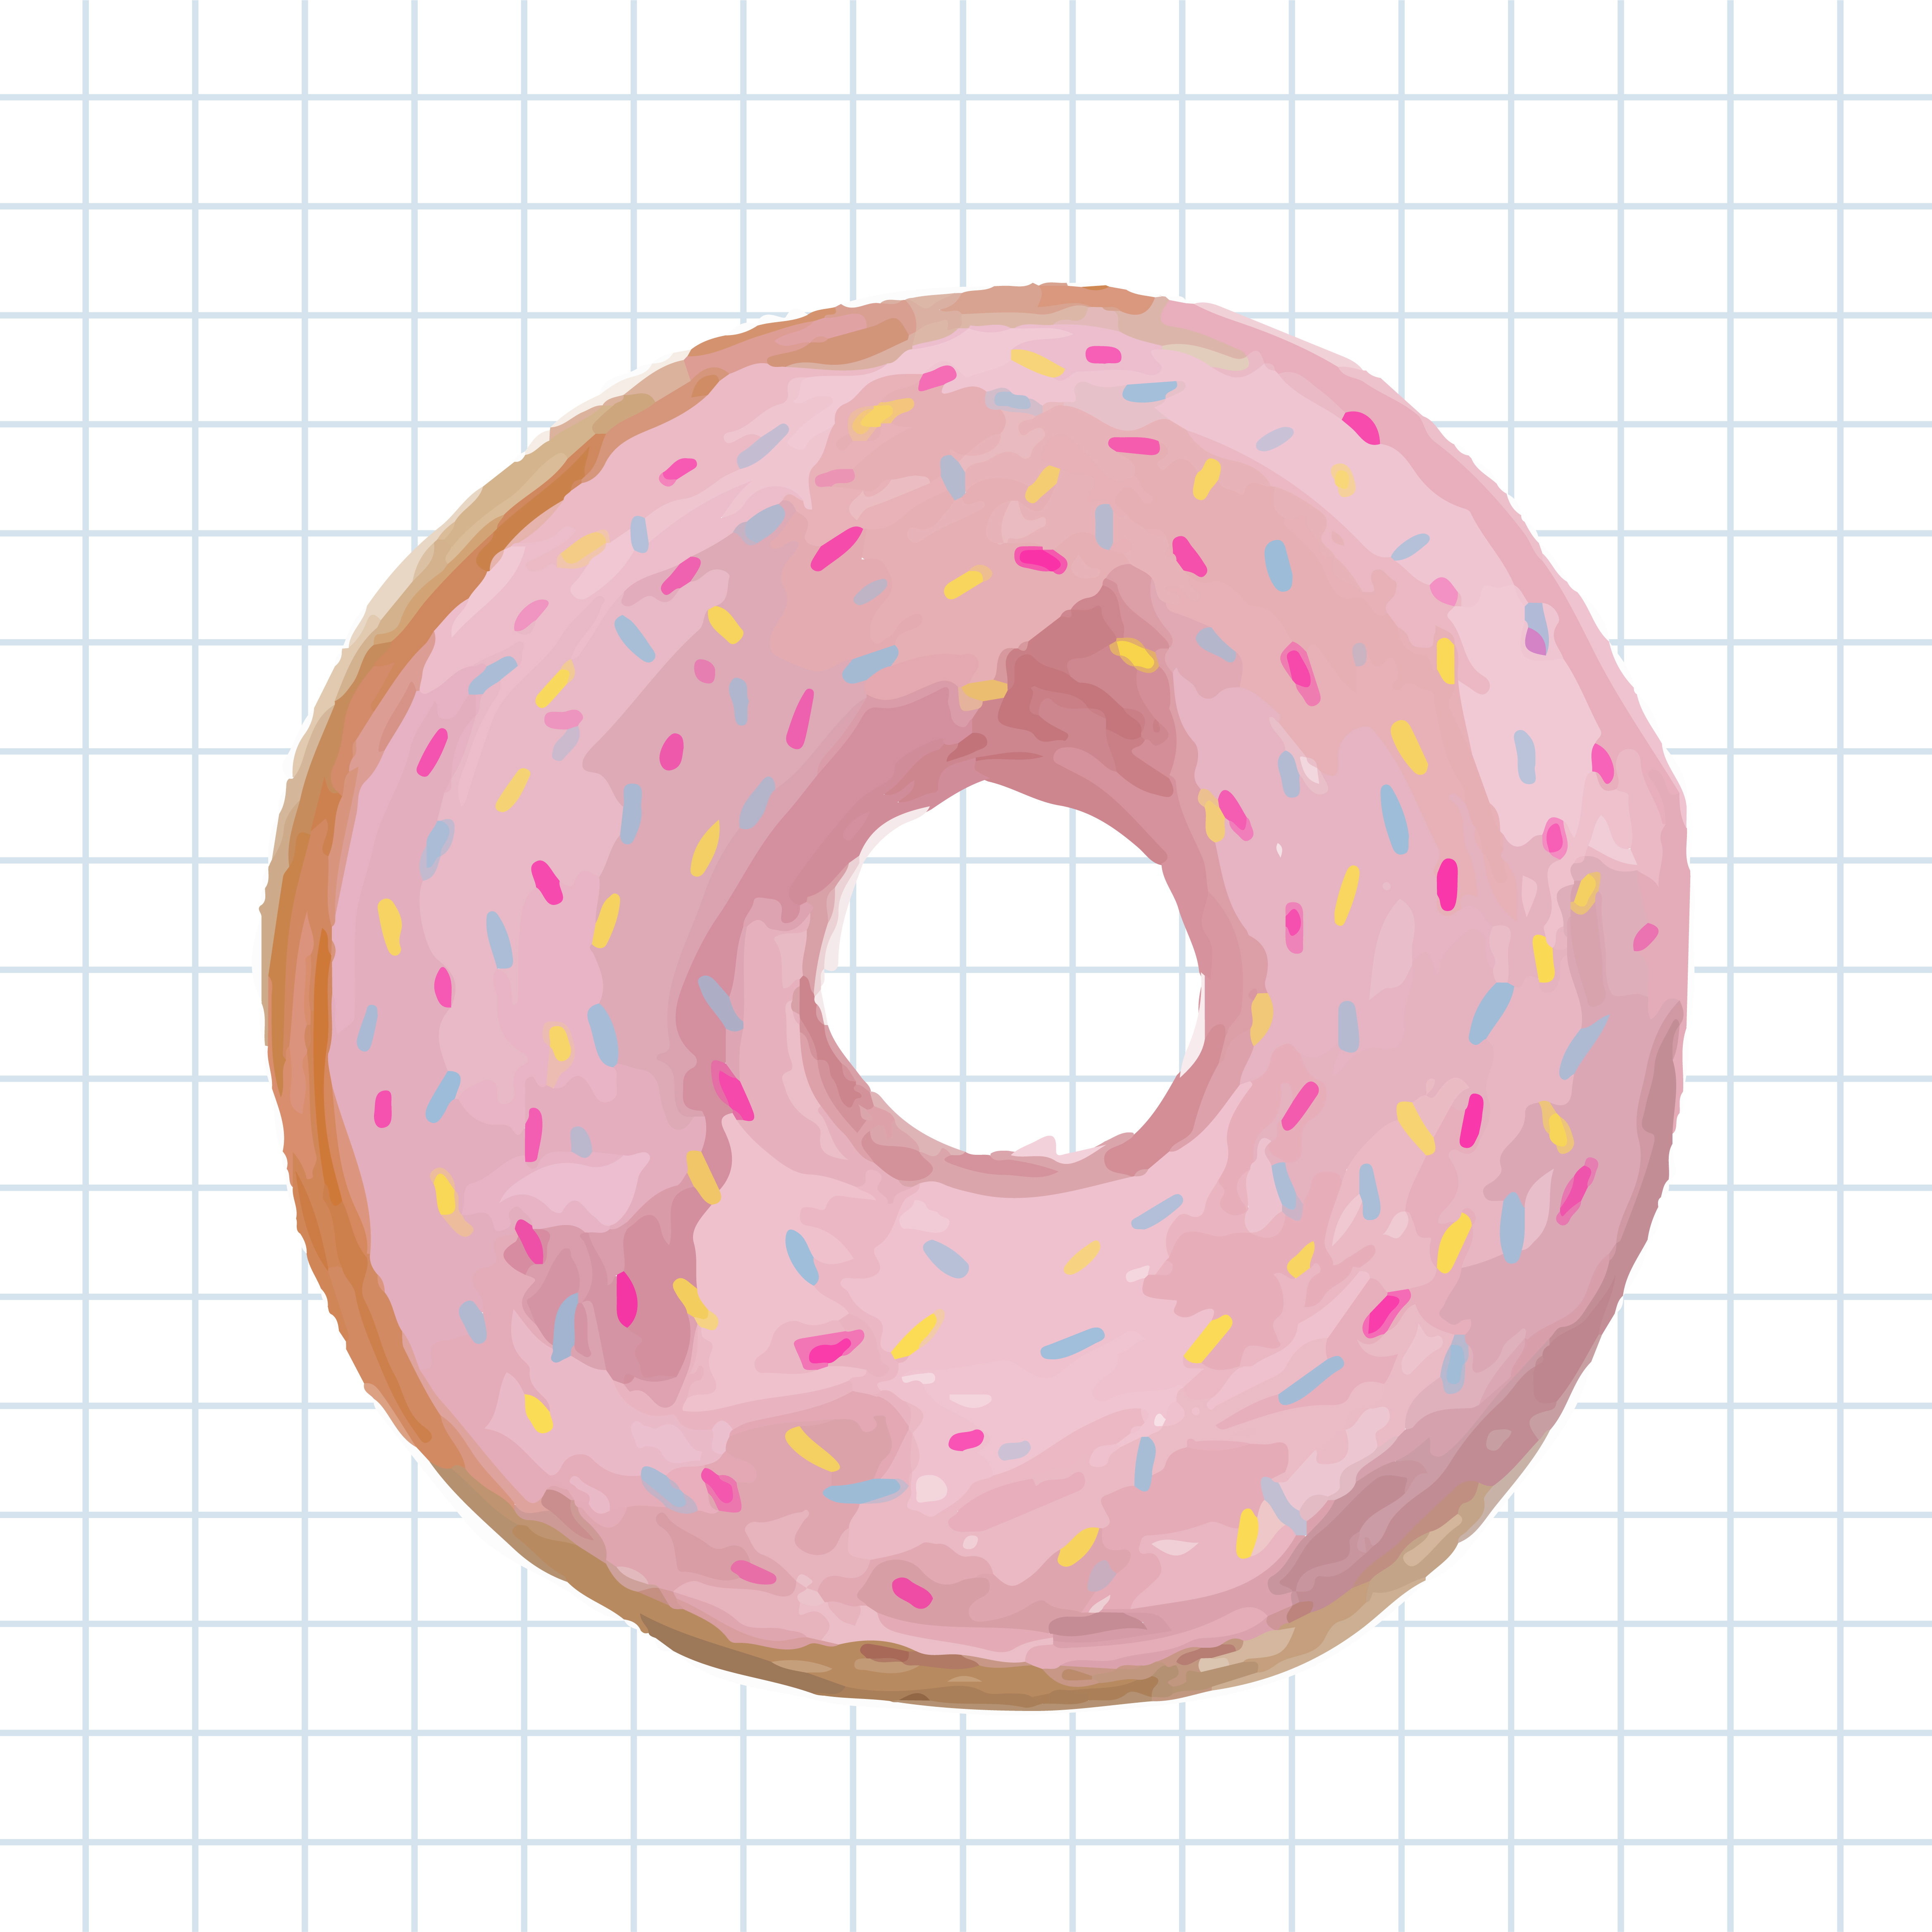 Hand drawn donut watercolor style - Download Free Vectors, Clipart